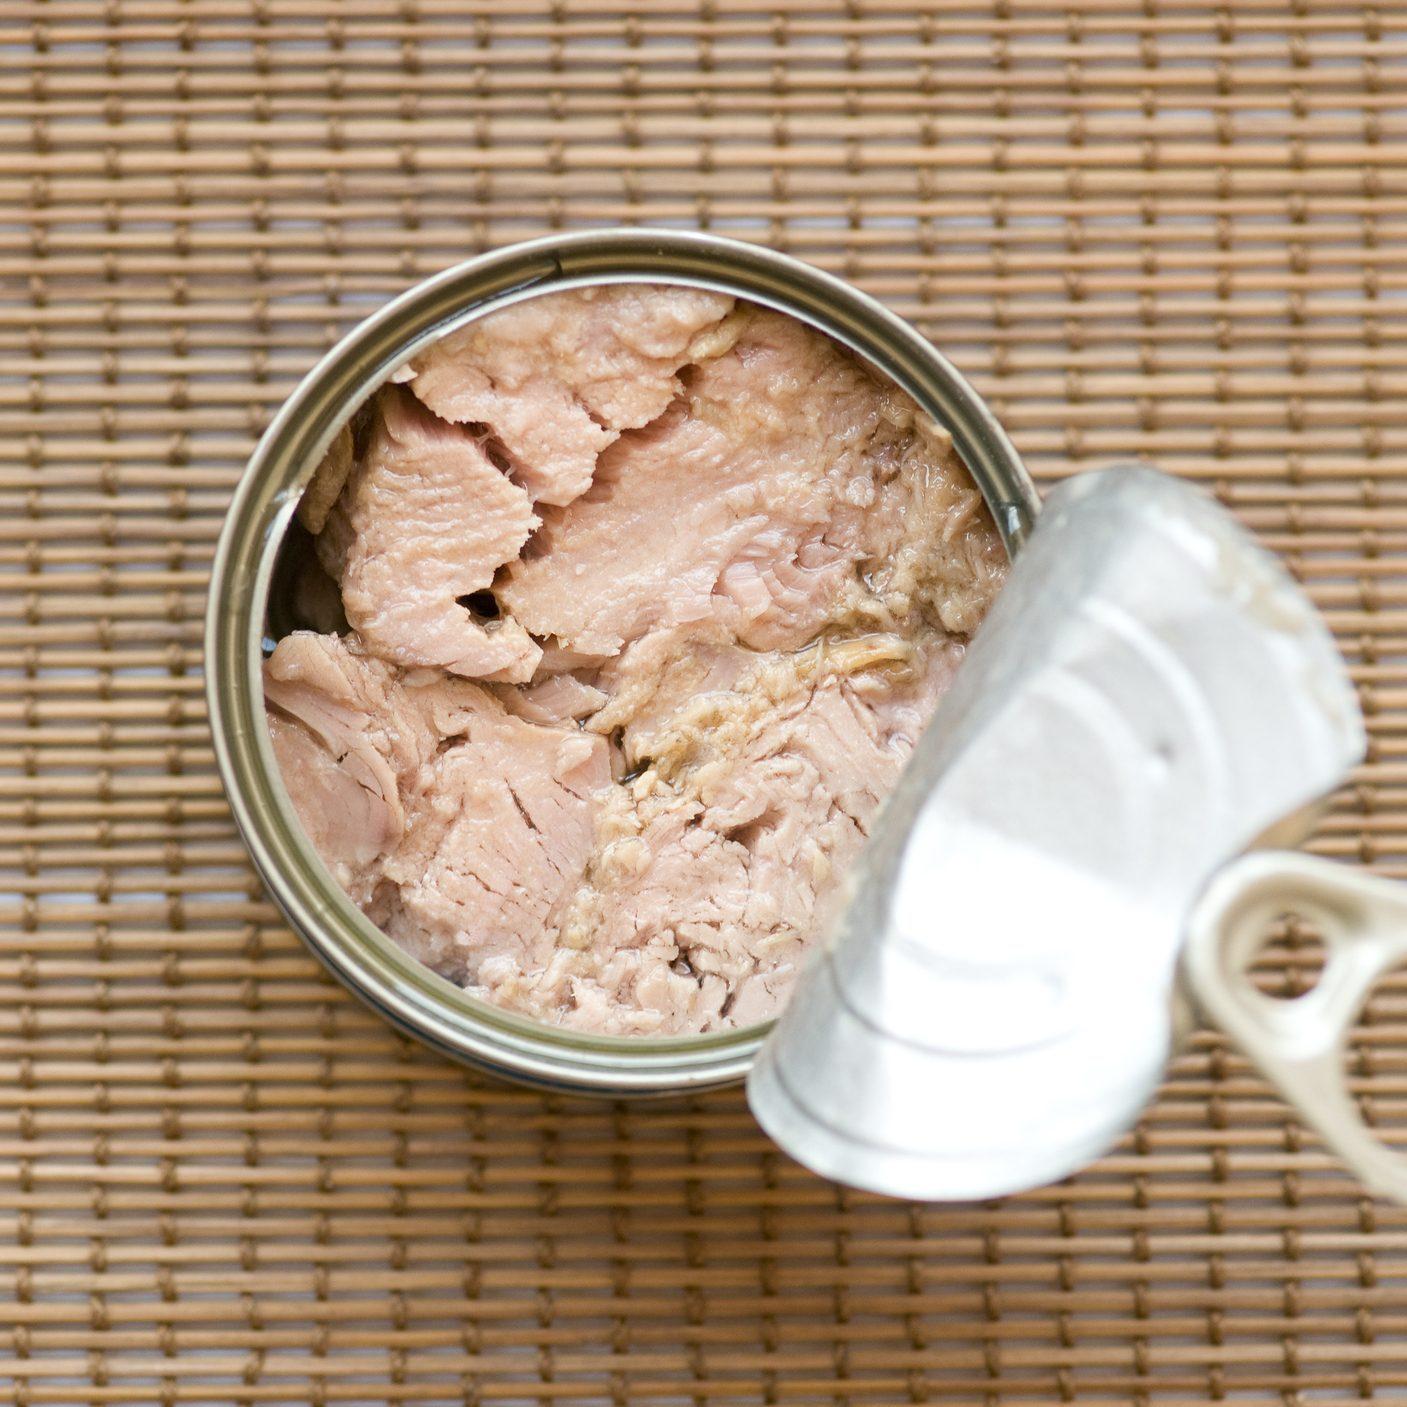 Is Canned Tuna Healthy? 4 Benefits You Should Know About